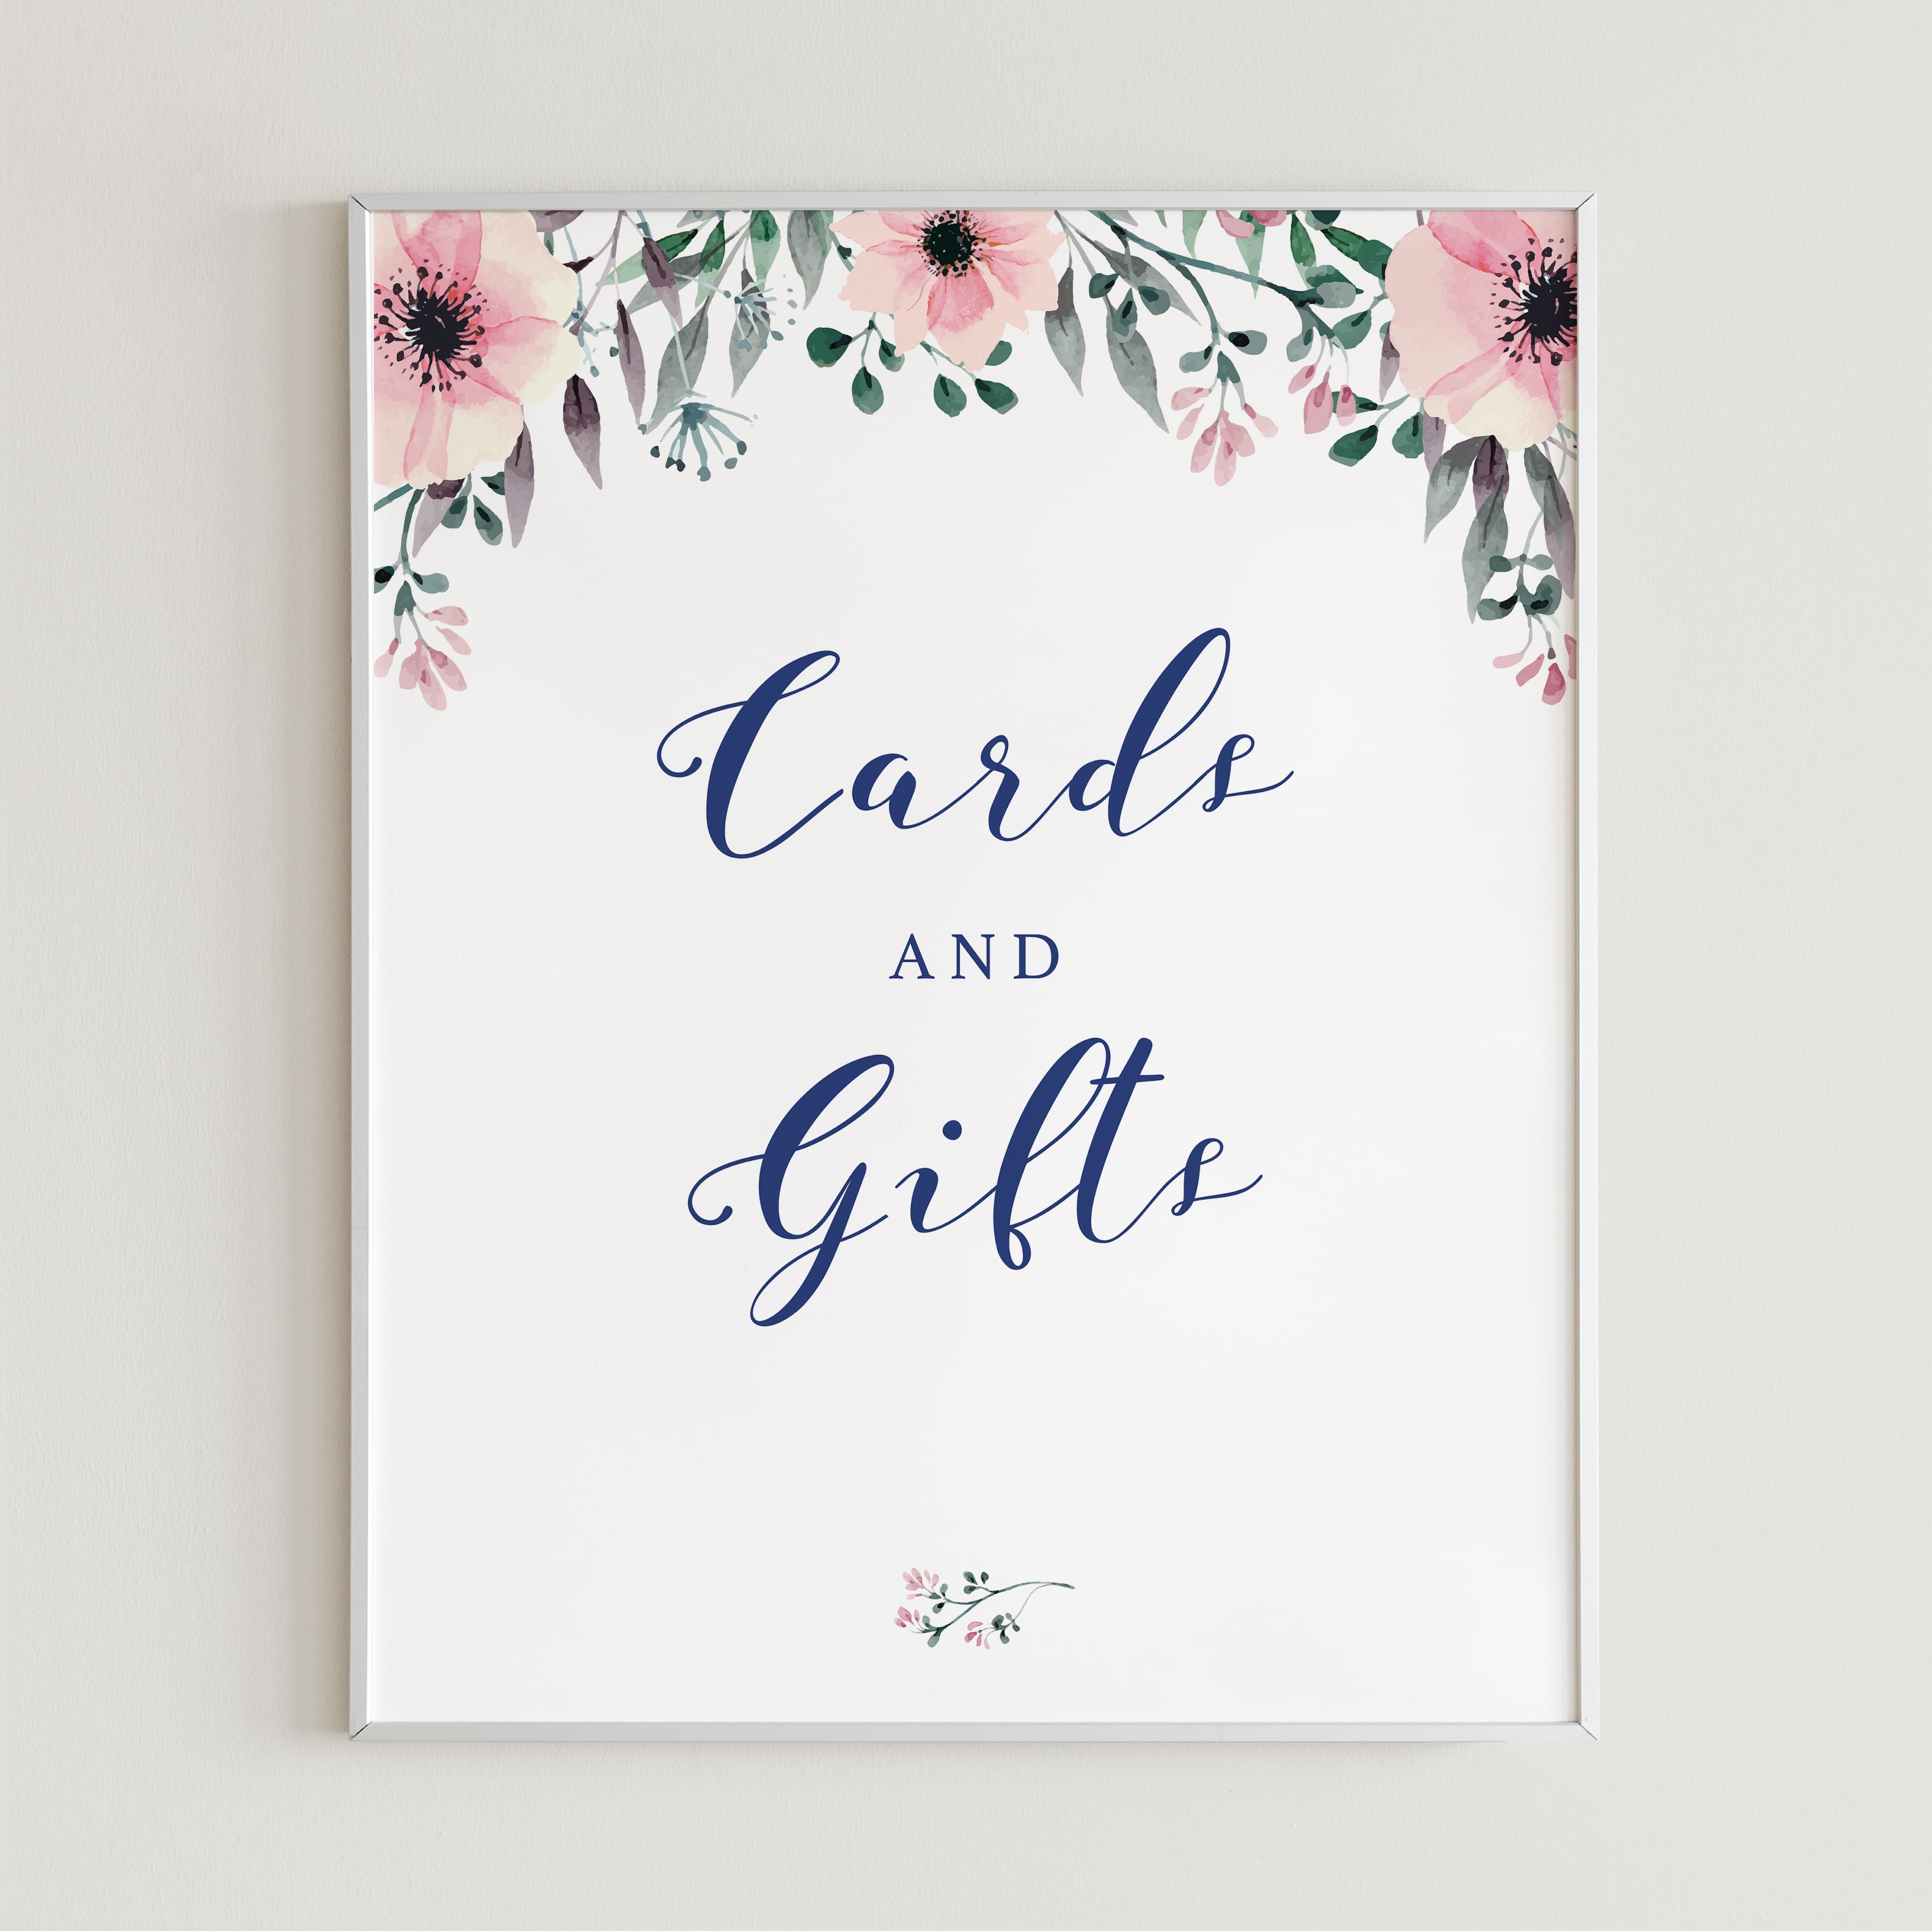 Floral bridal shower decor cards and gifts table sign by LittleSizzle